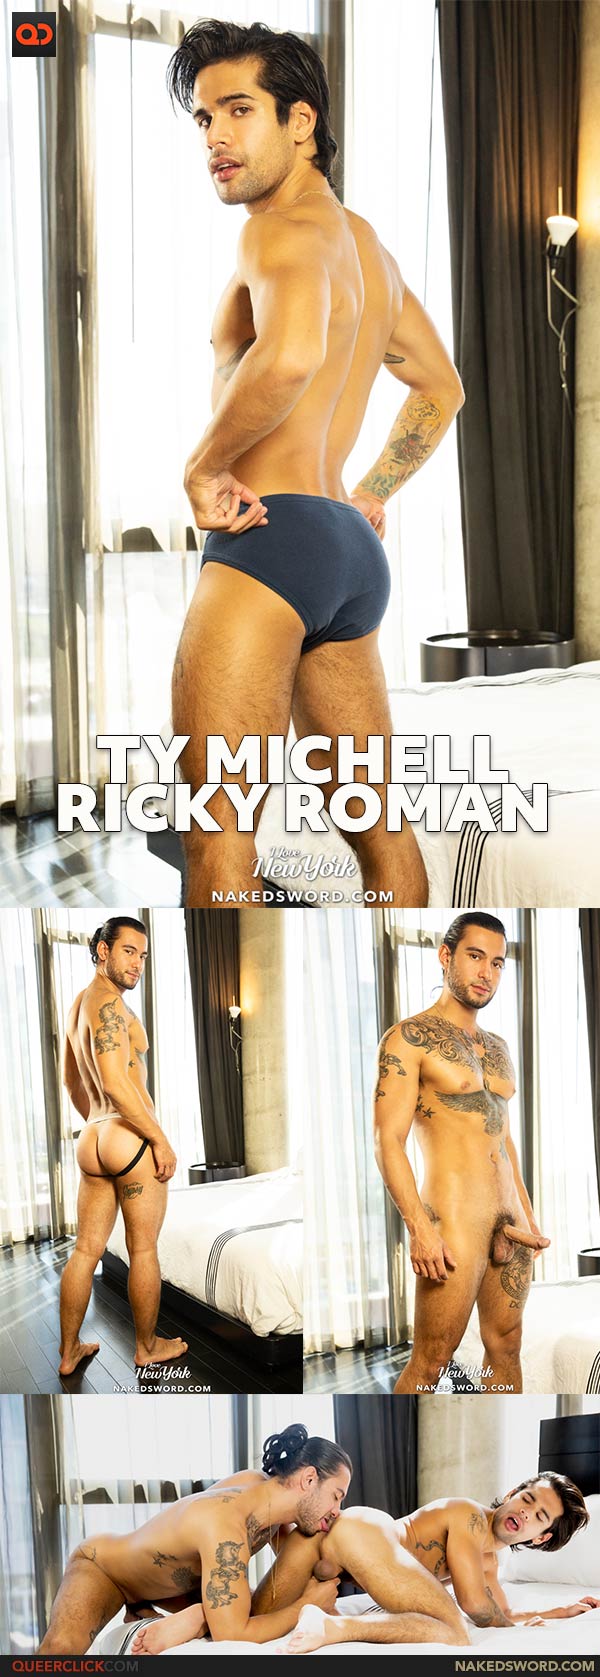 Naked Sword: Ricky Roman and Ty Mitchell